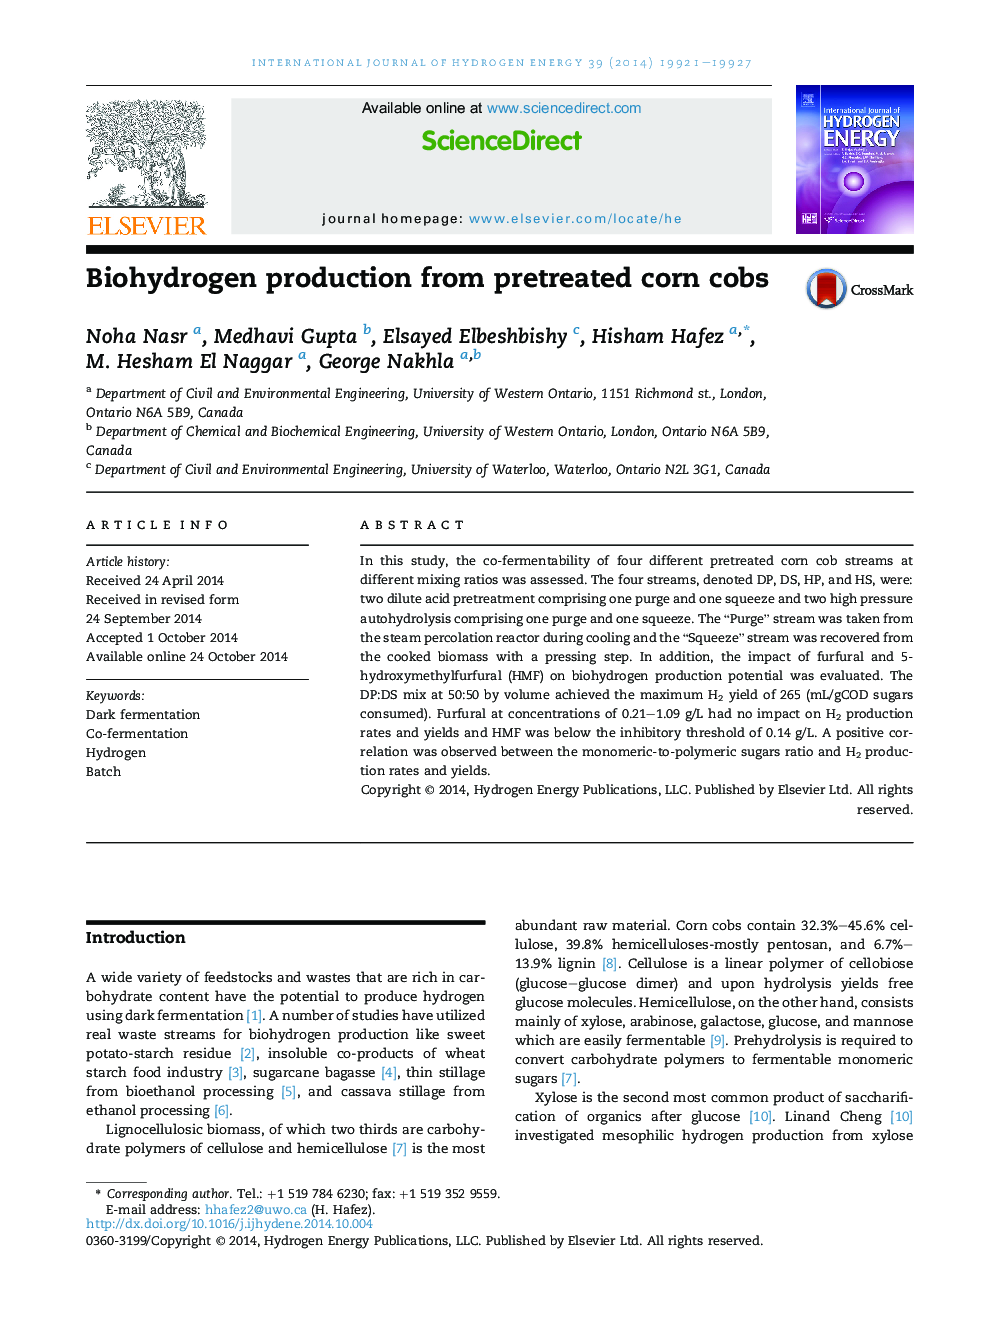 Biohydrogen production from pretreated corn cobs